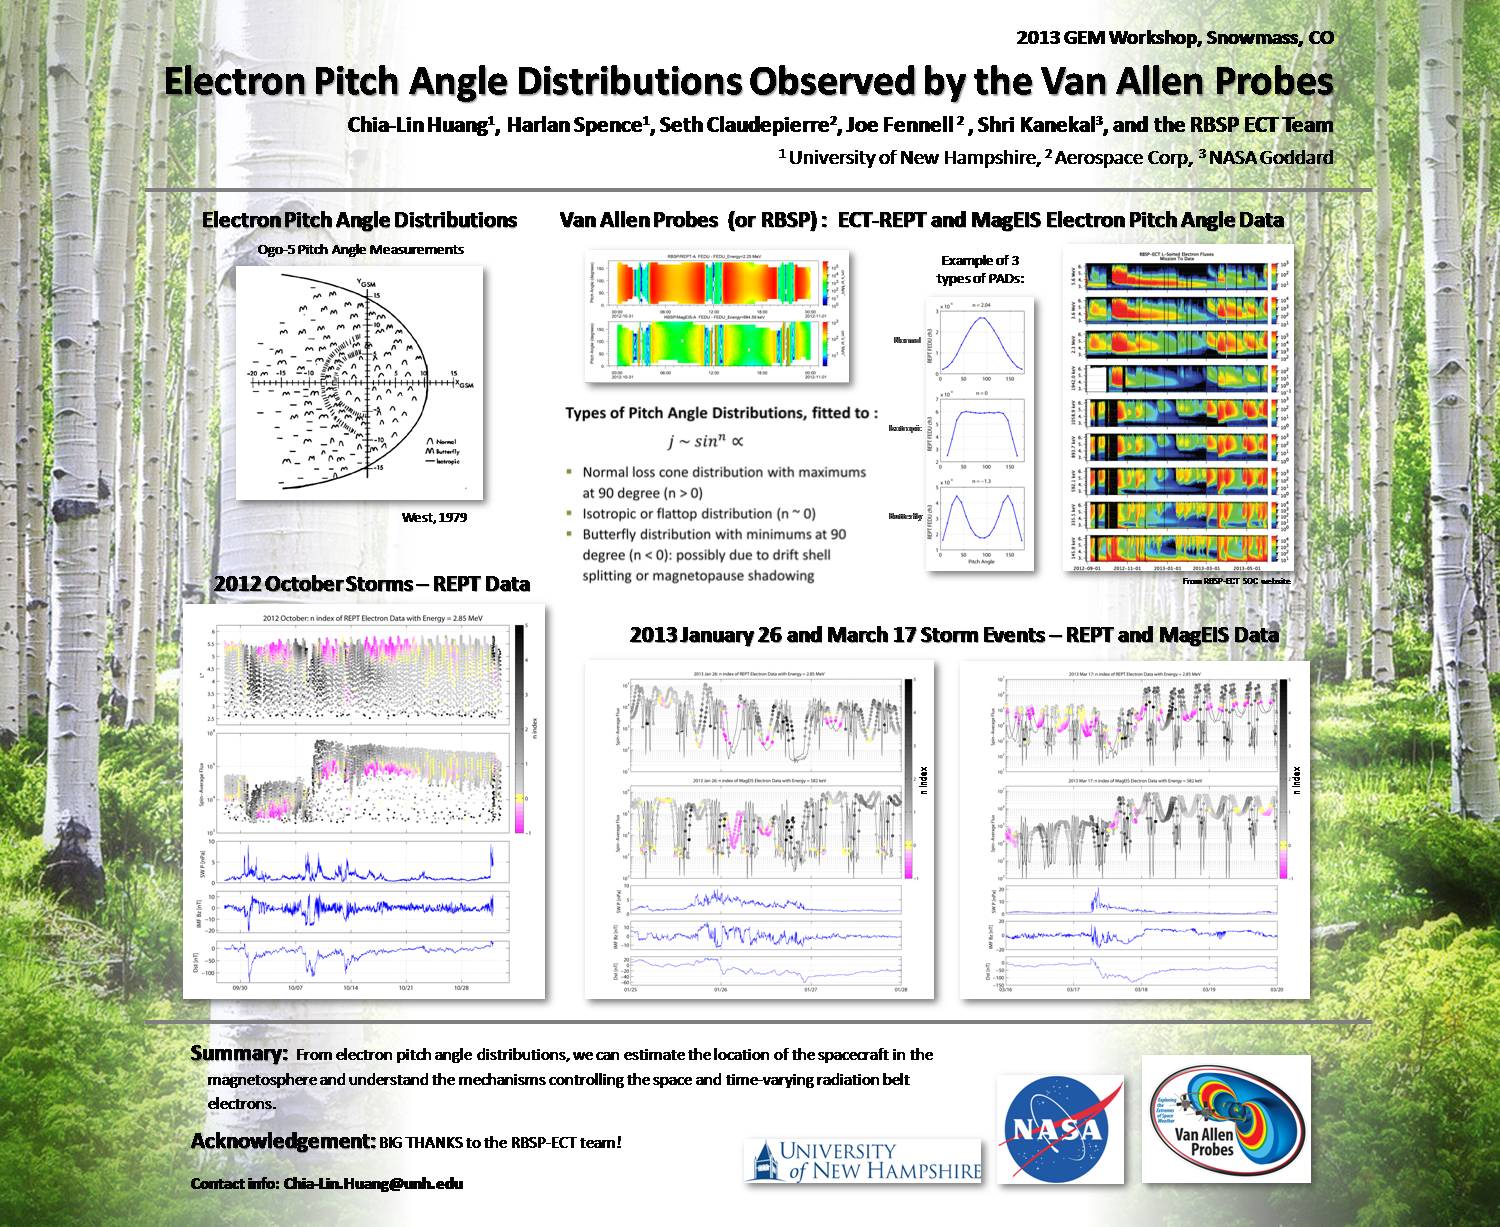 Electron Pitch Angle Distributions Observed By The Van Allen Probes by clhuang